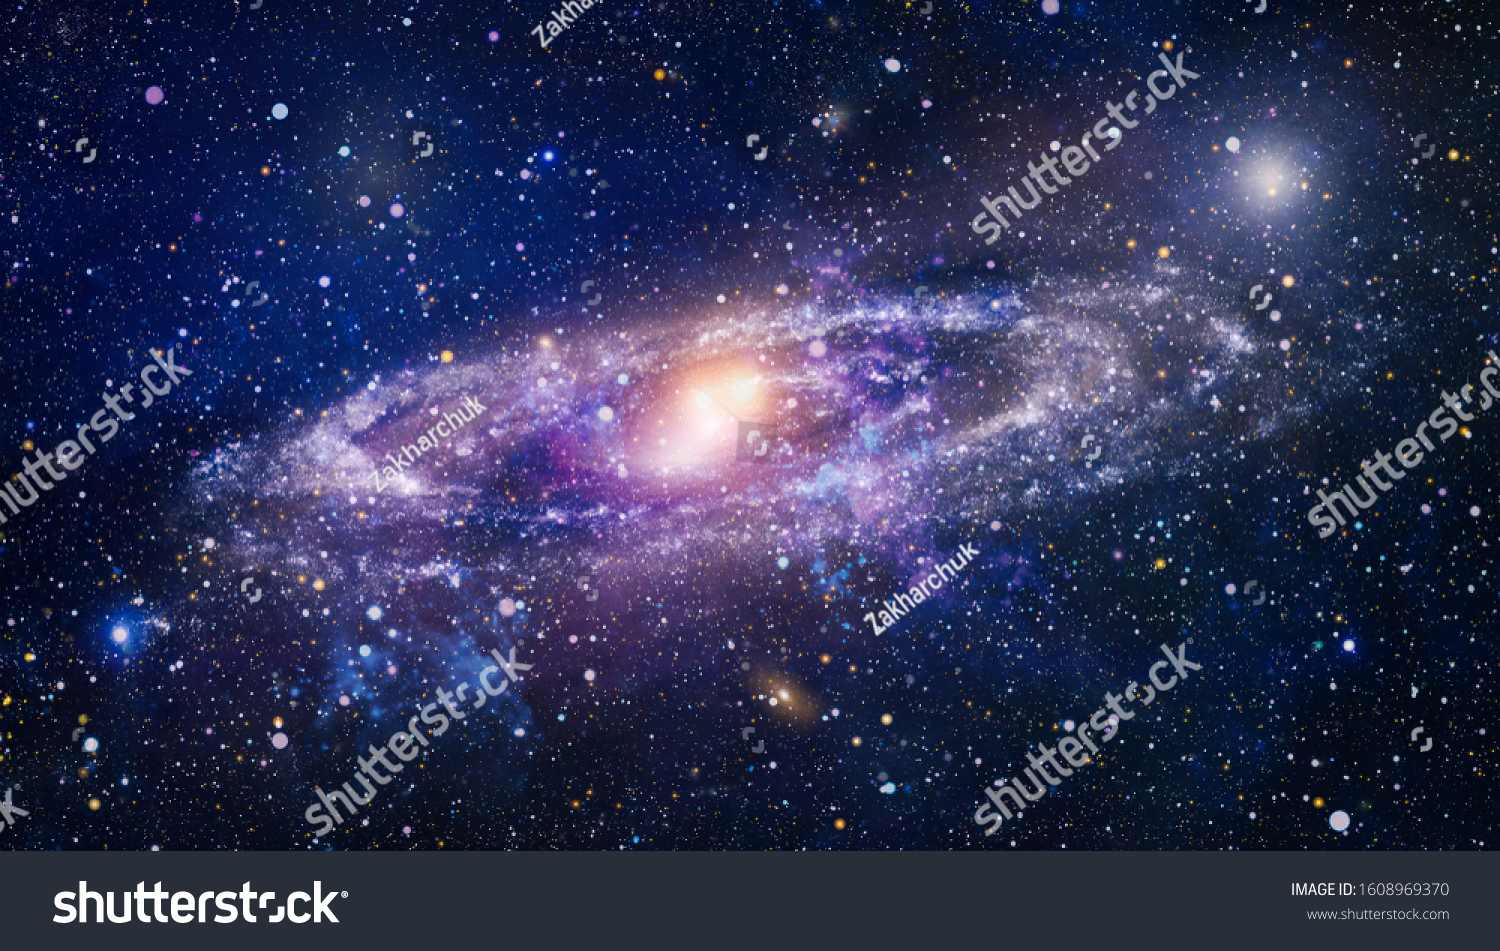 Planets, stars and galaxies in outer space showing the beauty of space exploration. Beautiful nebula, stars and galaxies. Elements of this image furnished by NASA. #1608969370